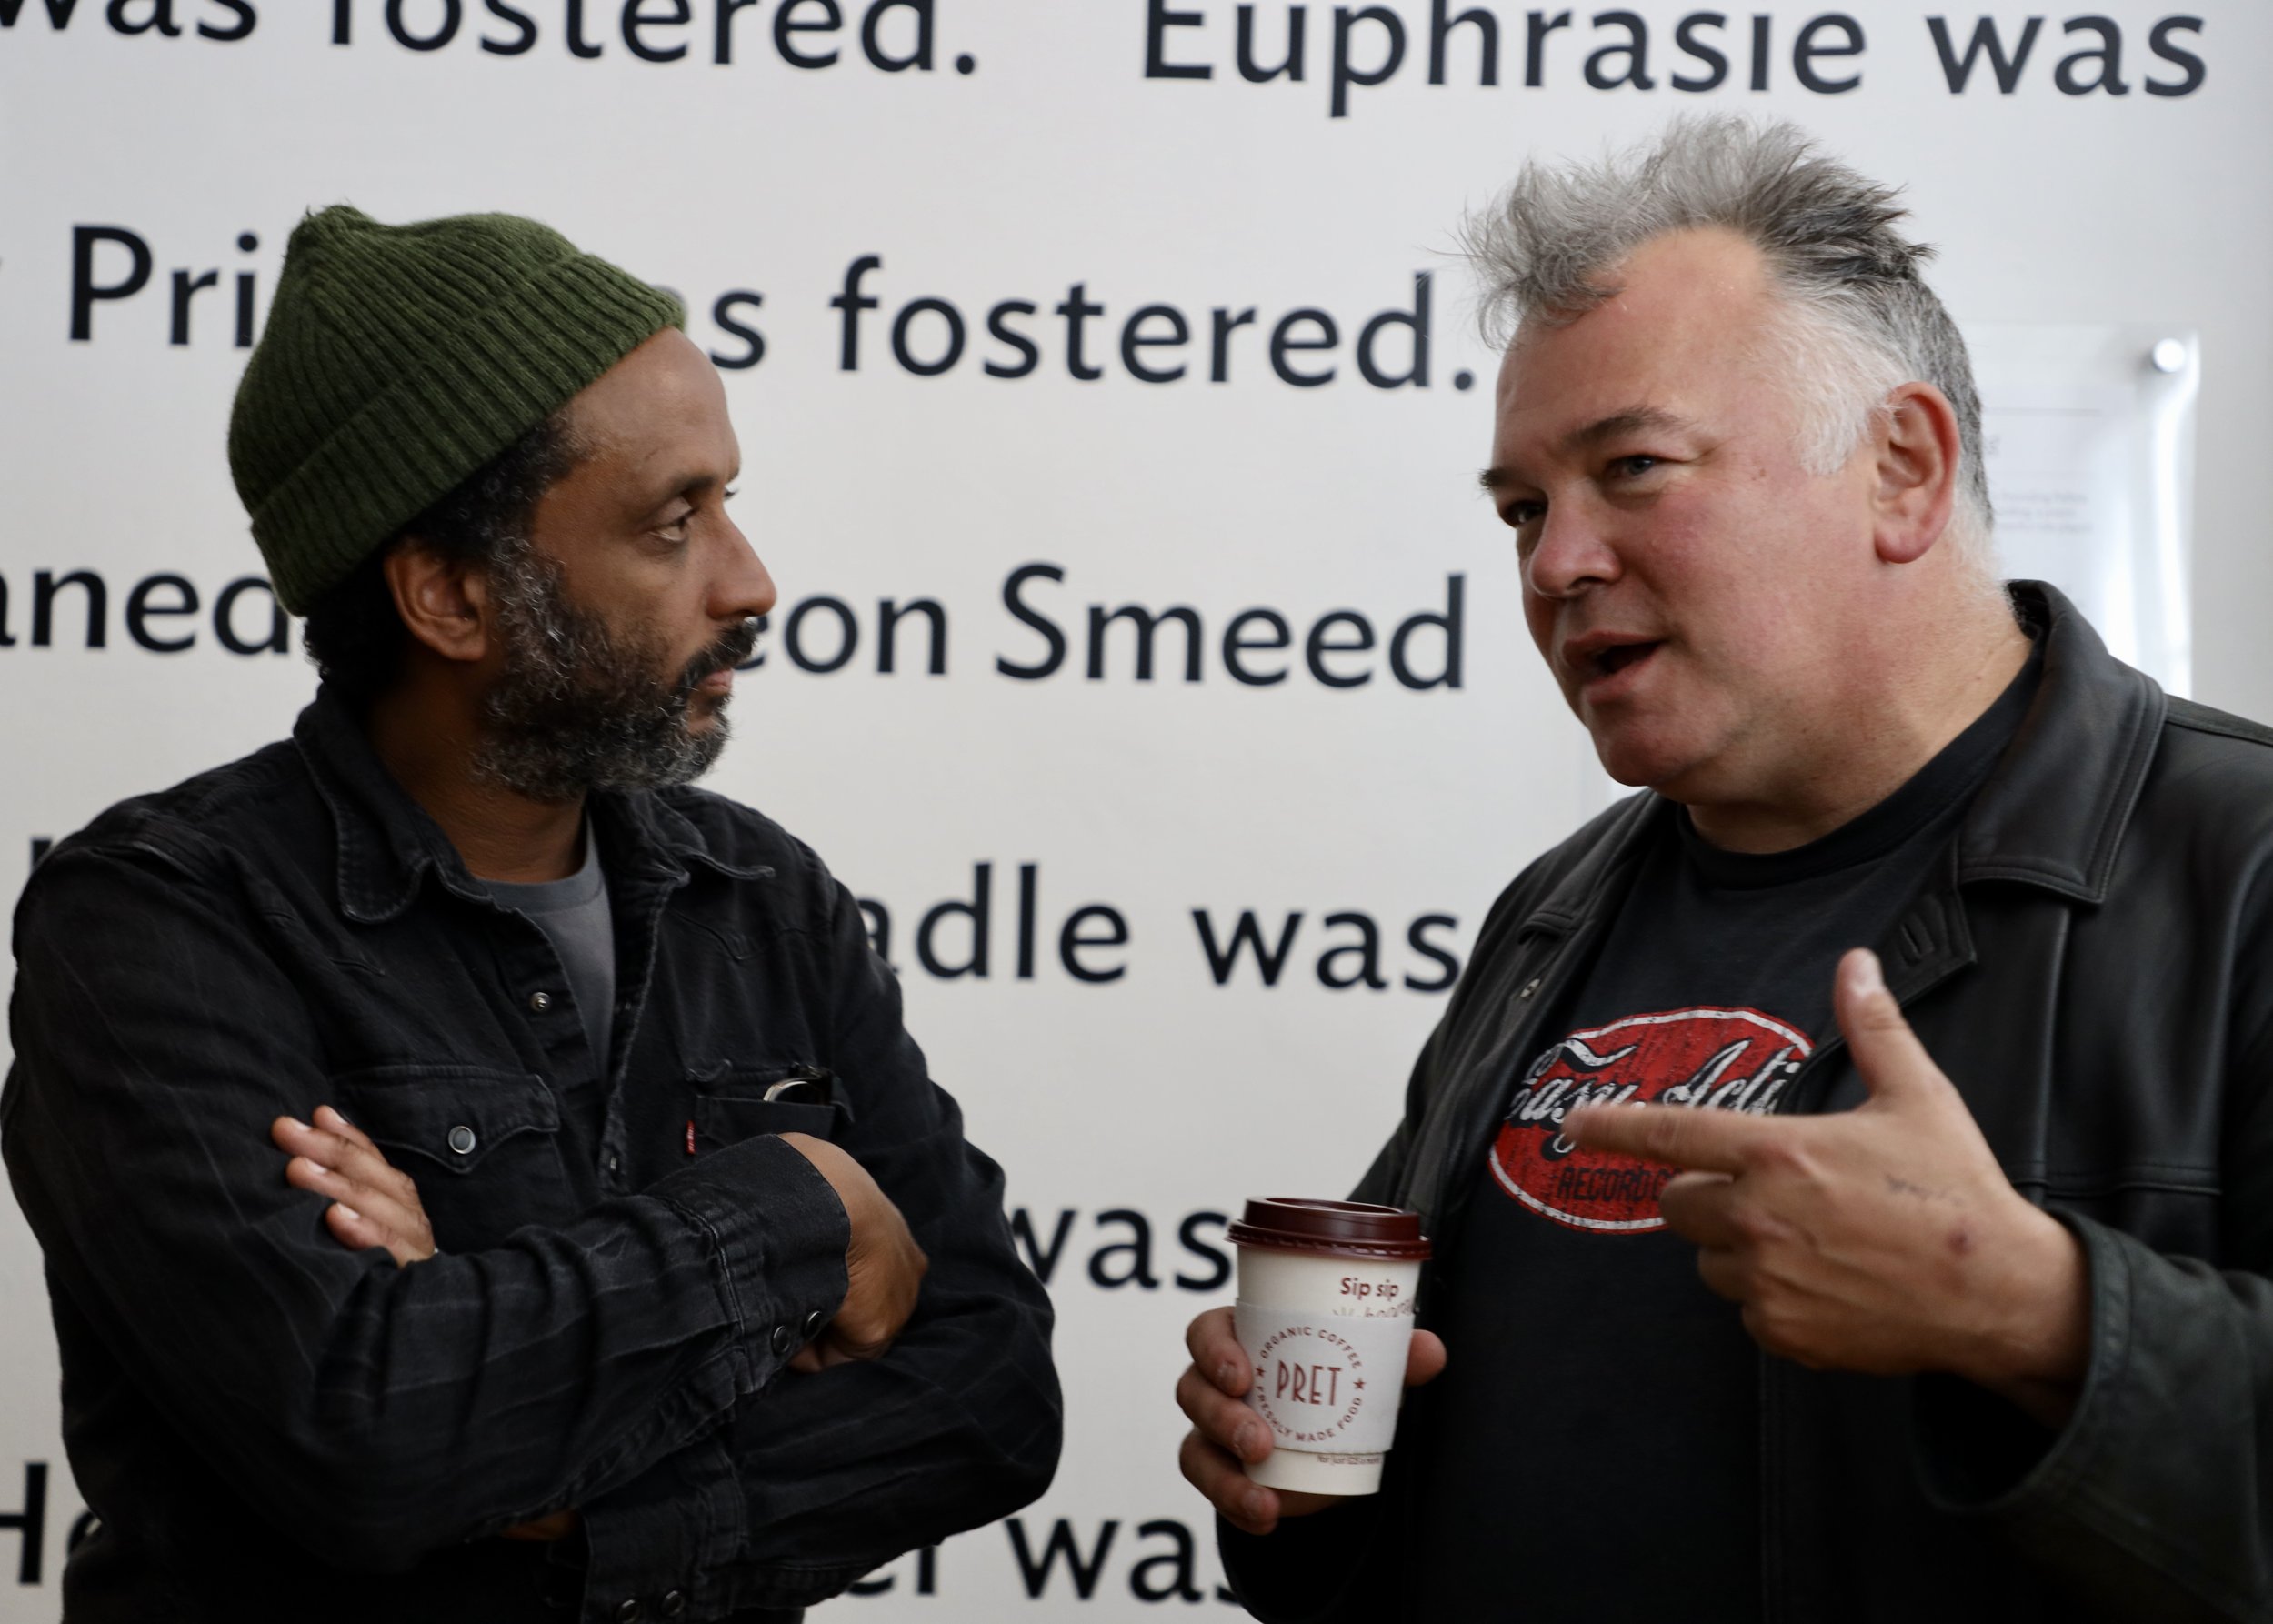 Musician and songwriter, bassist for the rock band Elbow Pete Turner talking to comedian, writer and artist Stewart Lee. 